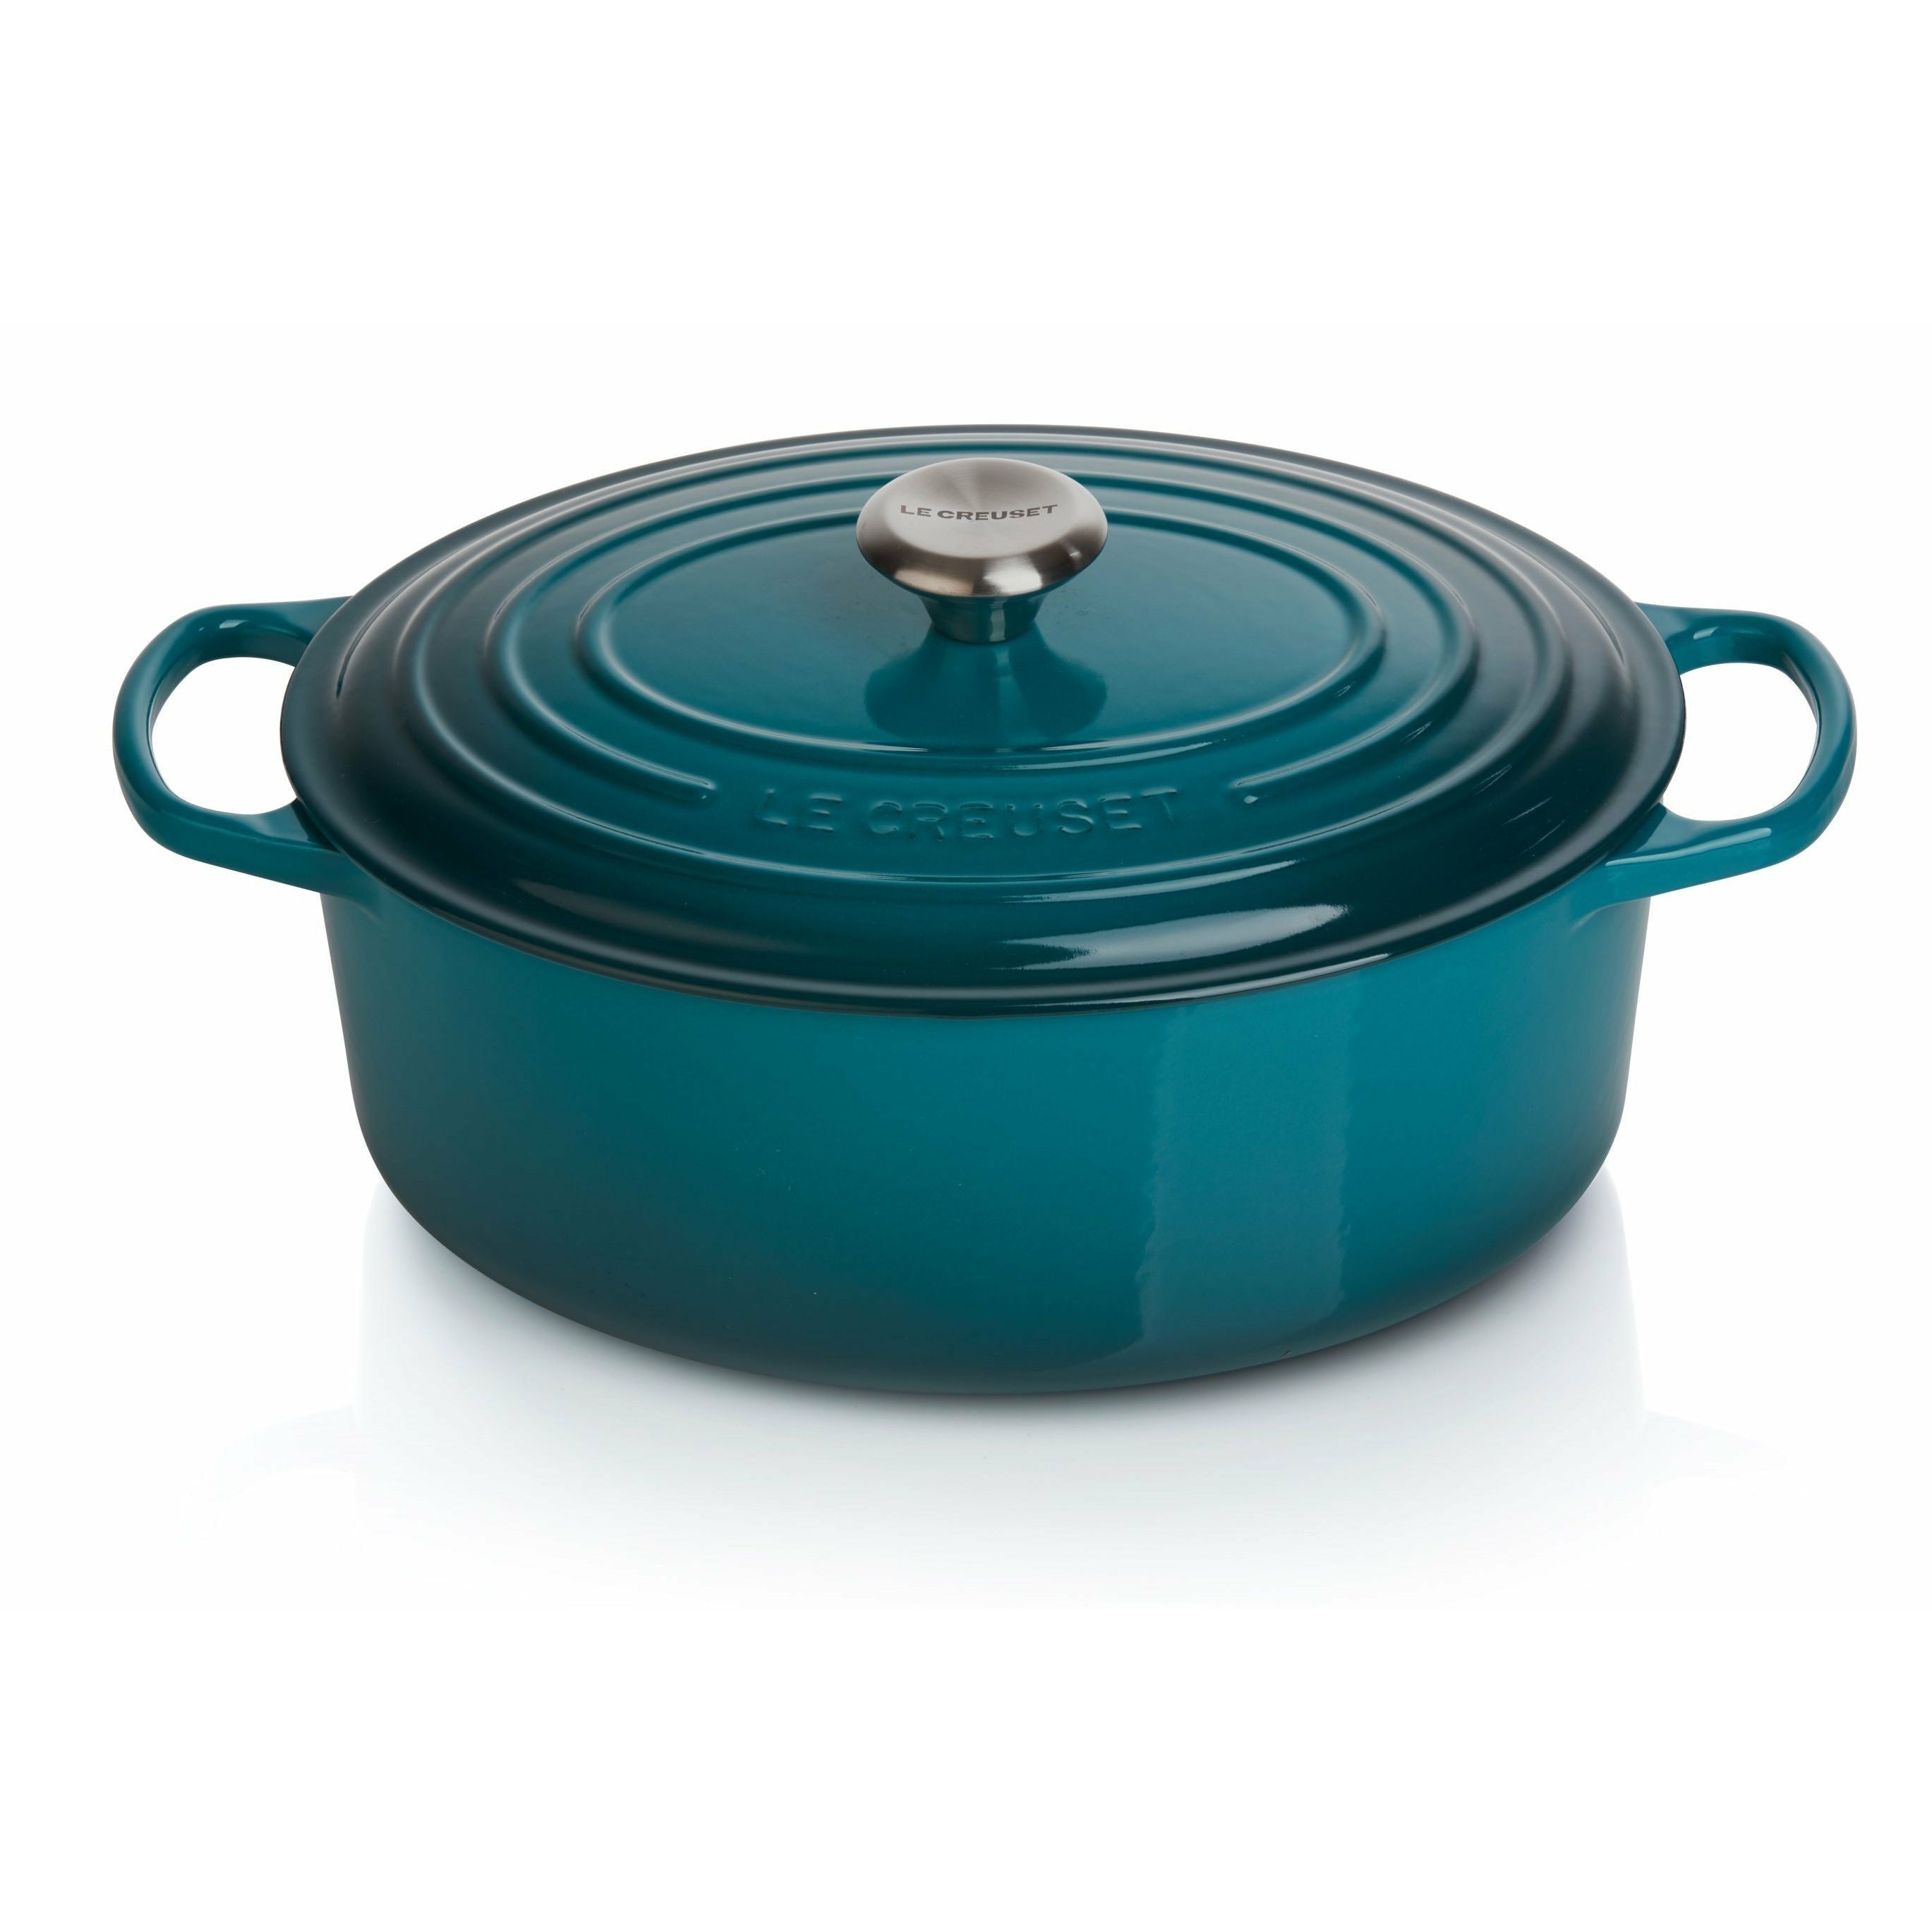 Le Creuset Signature Oval Roaster 31 cm, dyp teal